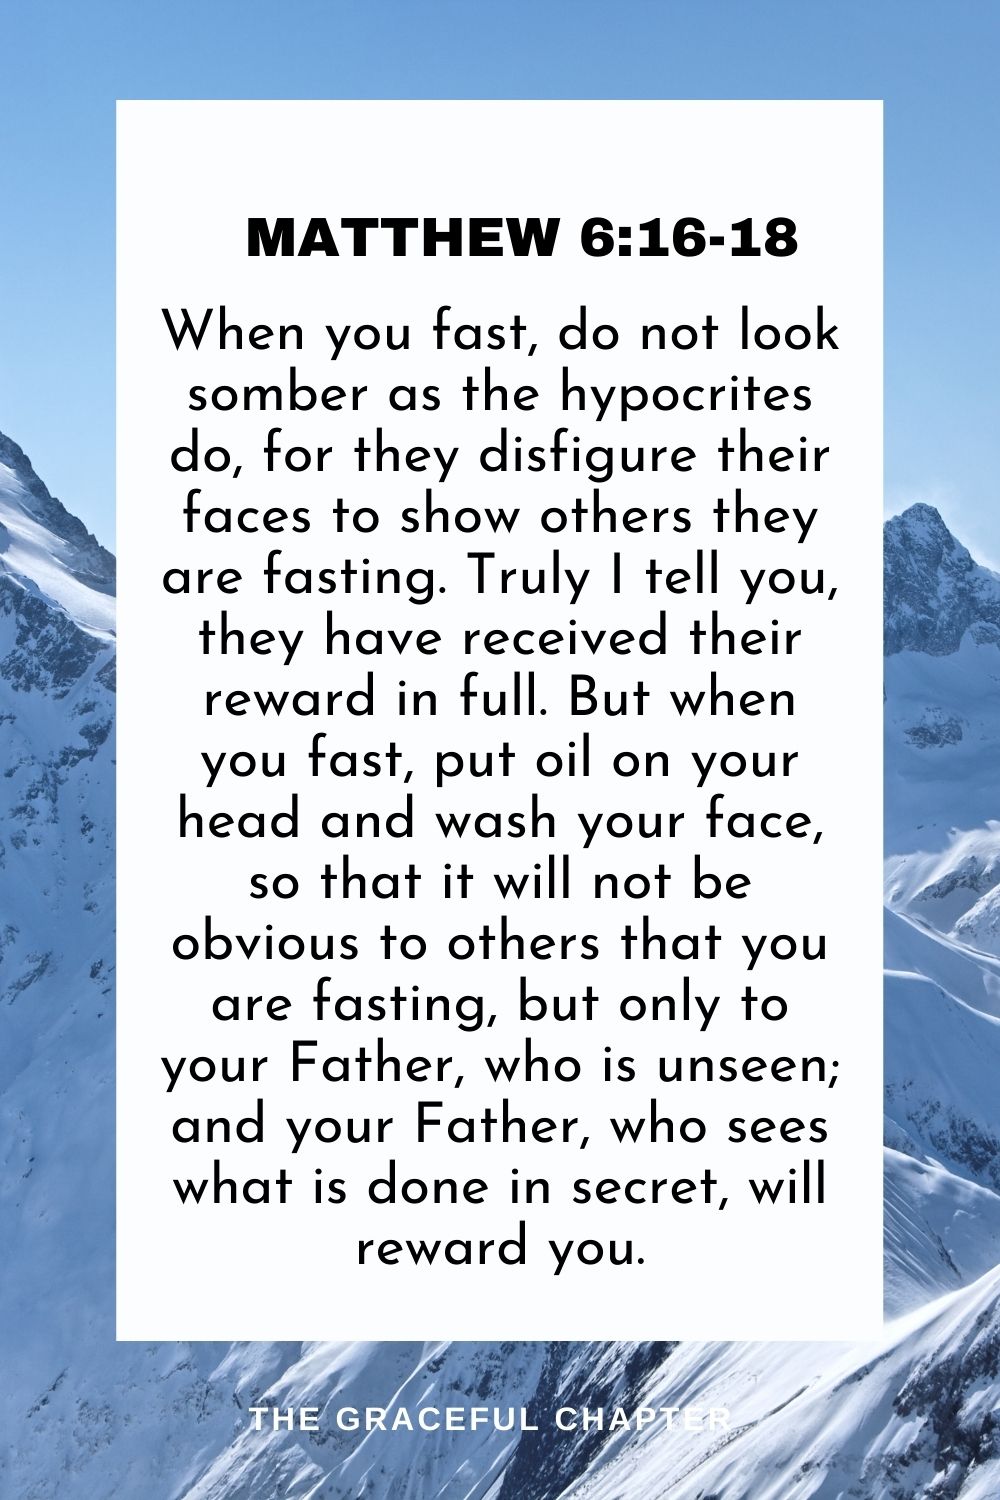 When you fast, do not look somber as the hypocrites do, for they disfigure their faces to show others they are fasting. Truly I tell you, they have received their reward in full. But when you fast, put oil on your head and wash your face, so that it will not be obvious to others that you are fasting, but only to your Father, who is unseen; and your Father, who sees what is done in secret, will reward you. Matthew 6:16-18